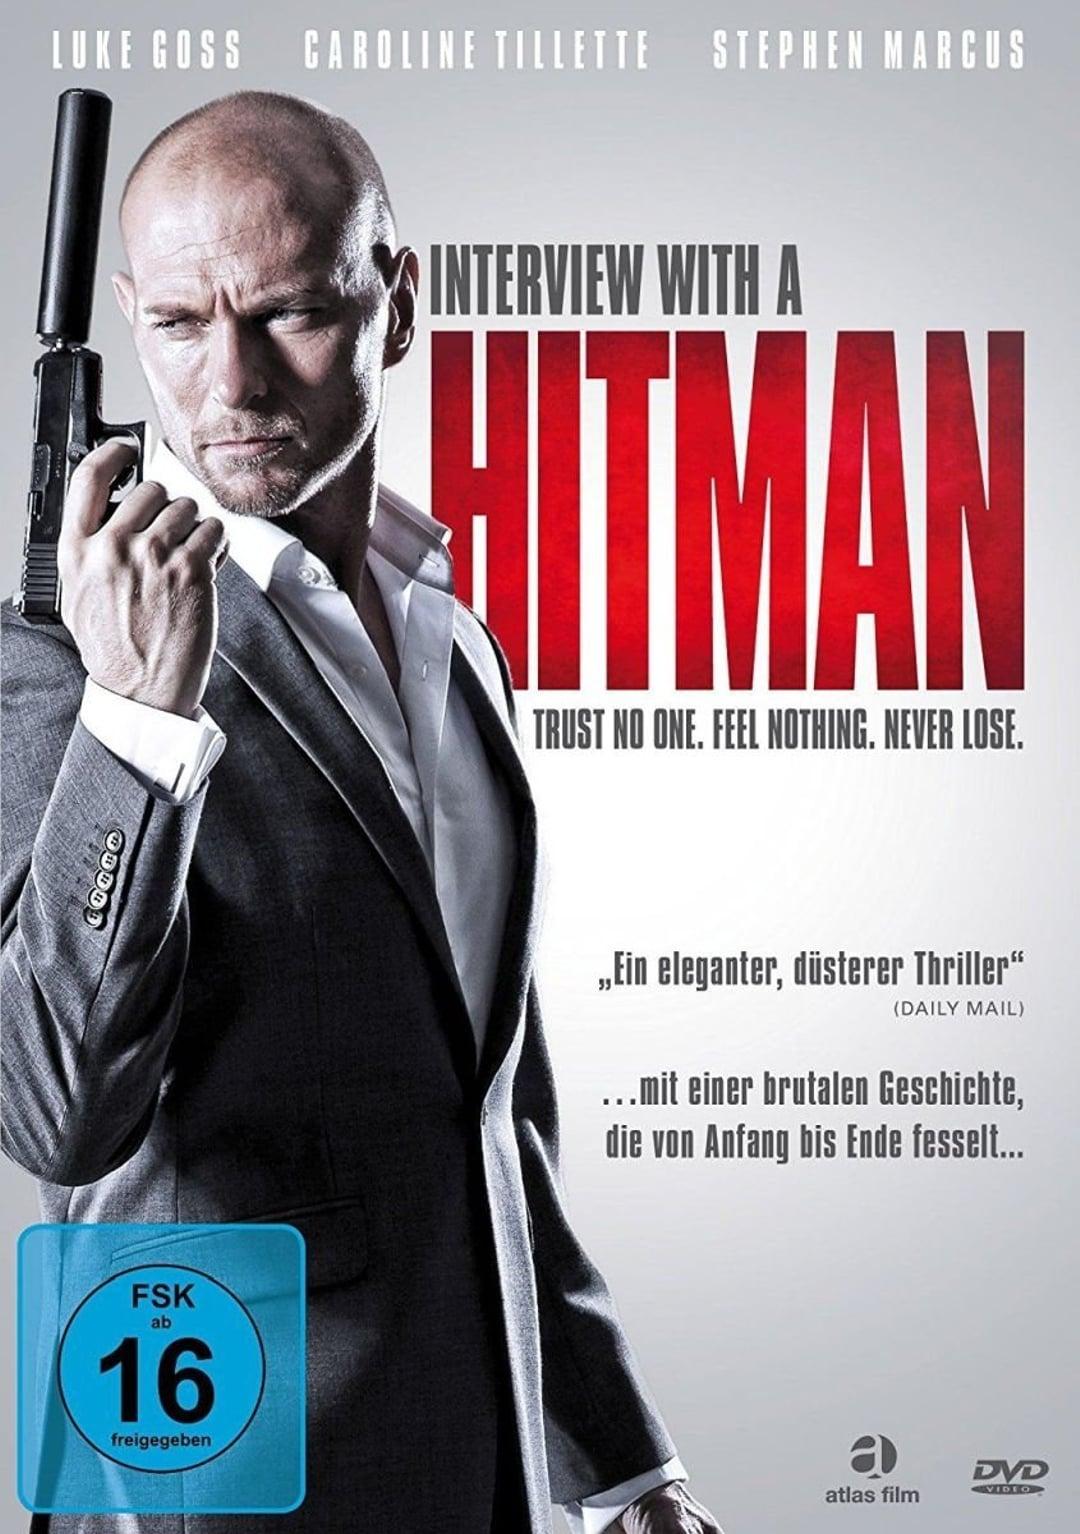 Interview with a Hitman poster